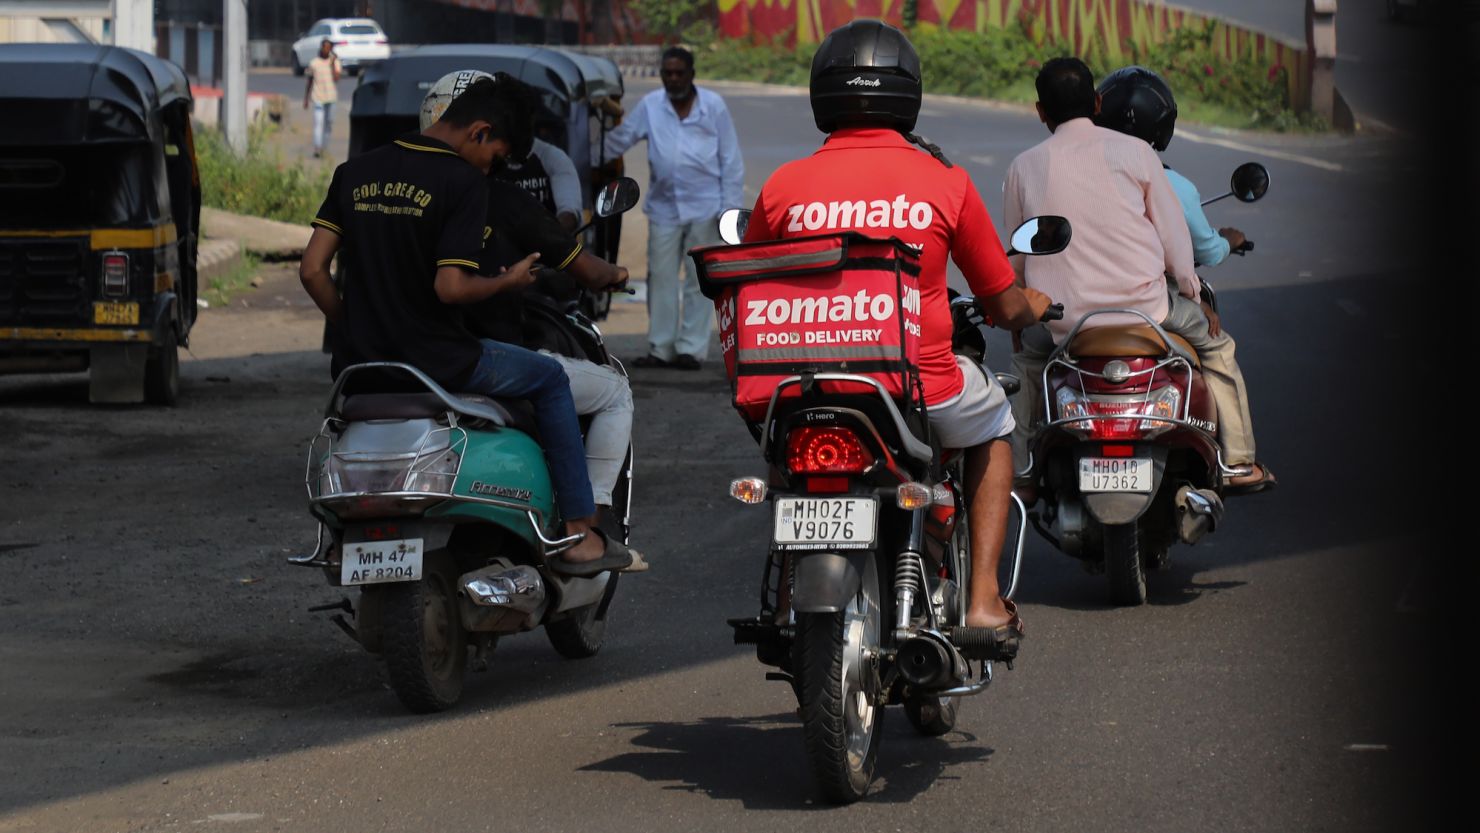 A Zomato delivery worker in Mumbai